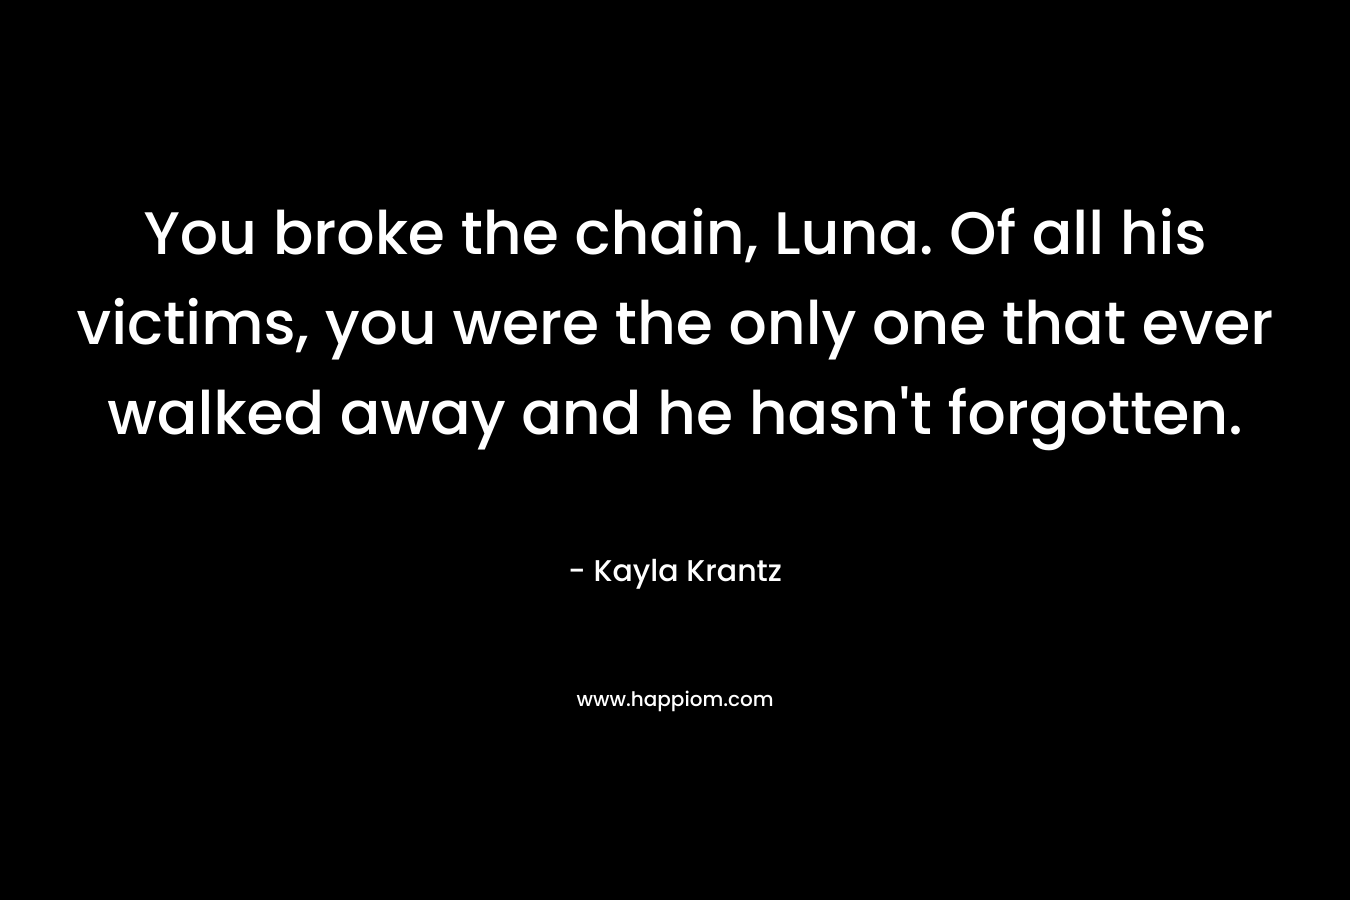 You broke the chain, Luna. Of all his victims, you were the only one that ever walked away and he hasn’t forgotten. – Kayla Krantz